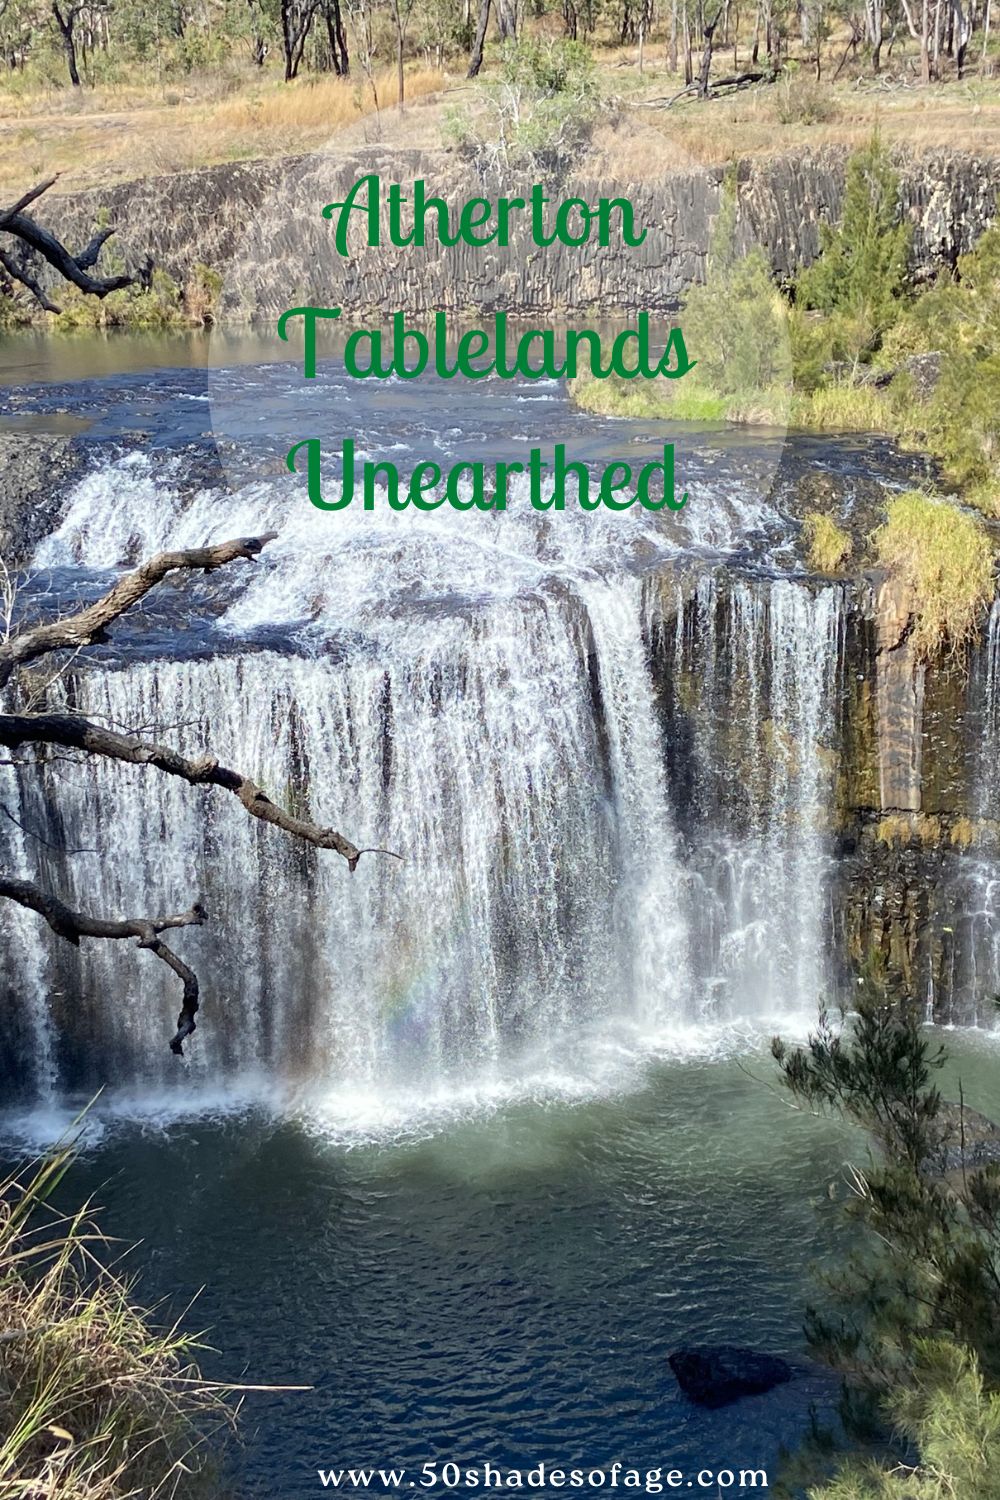 Atherton Tablelands Unearthed